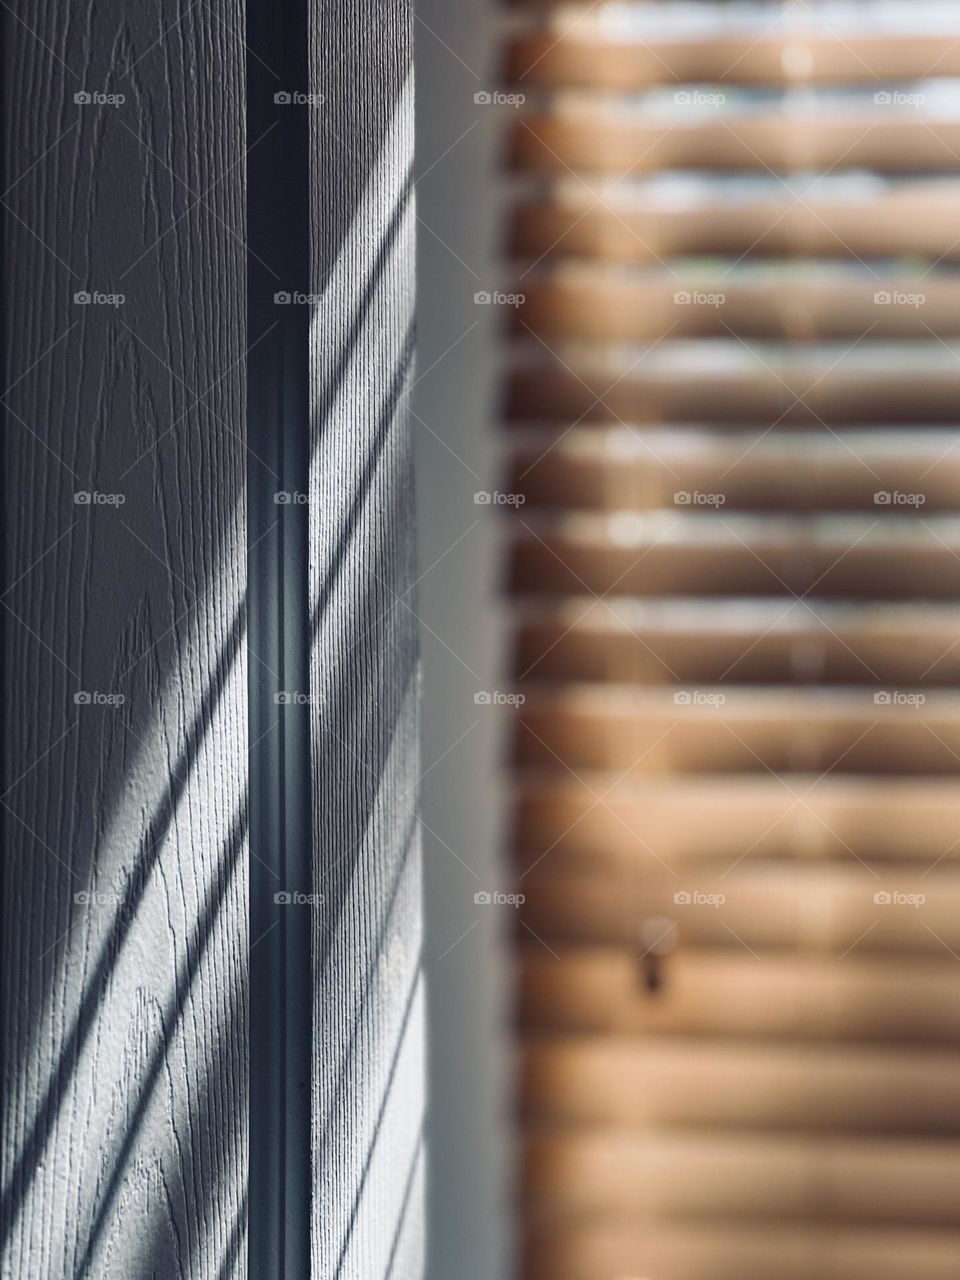 The simple magic of light through window blinds onto an interior wall and door